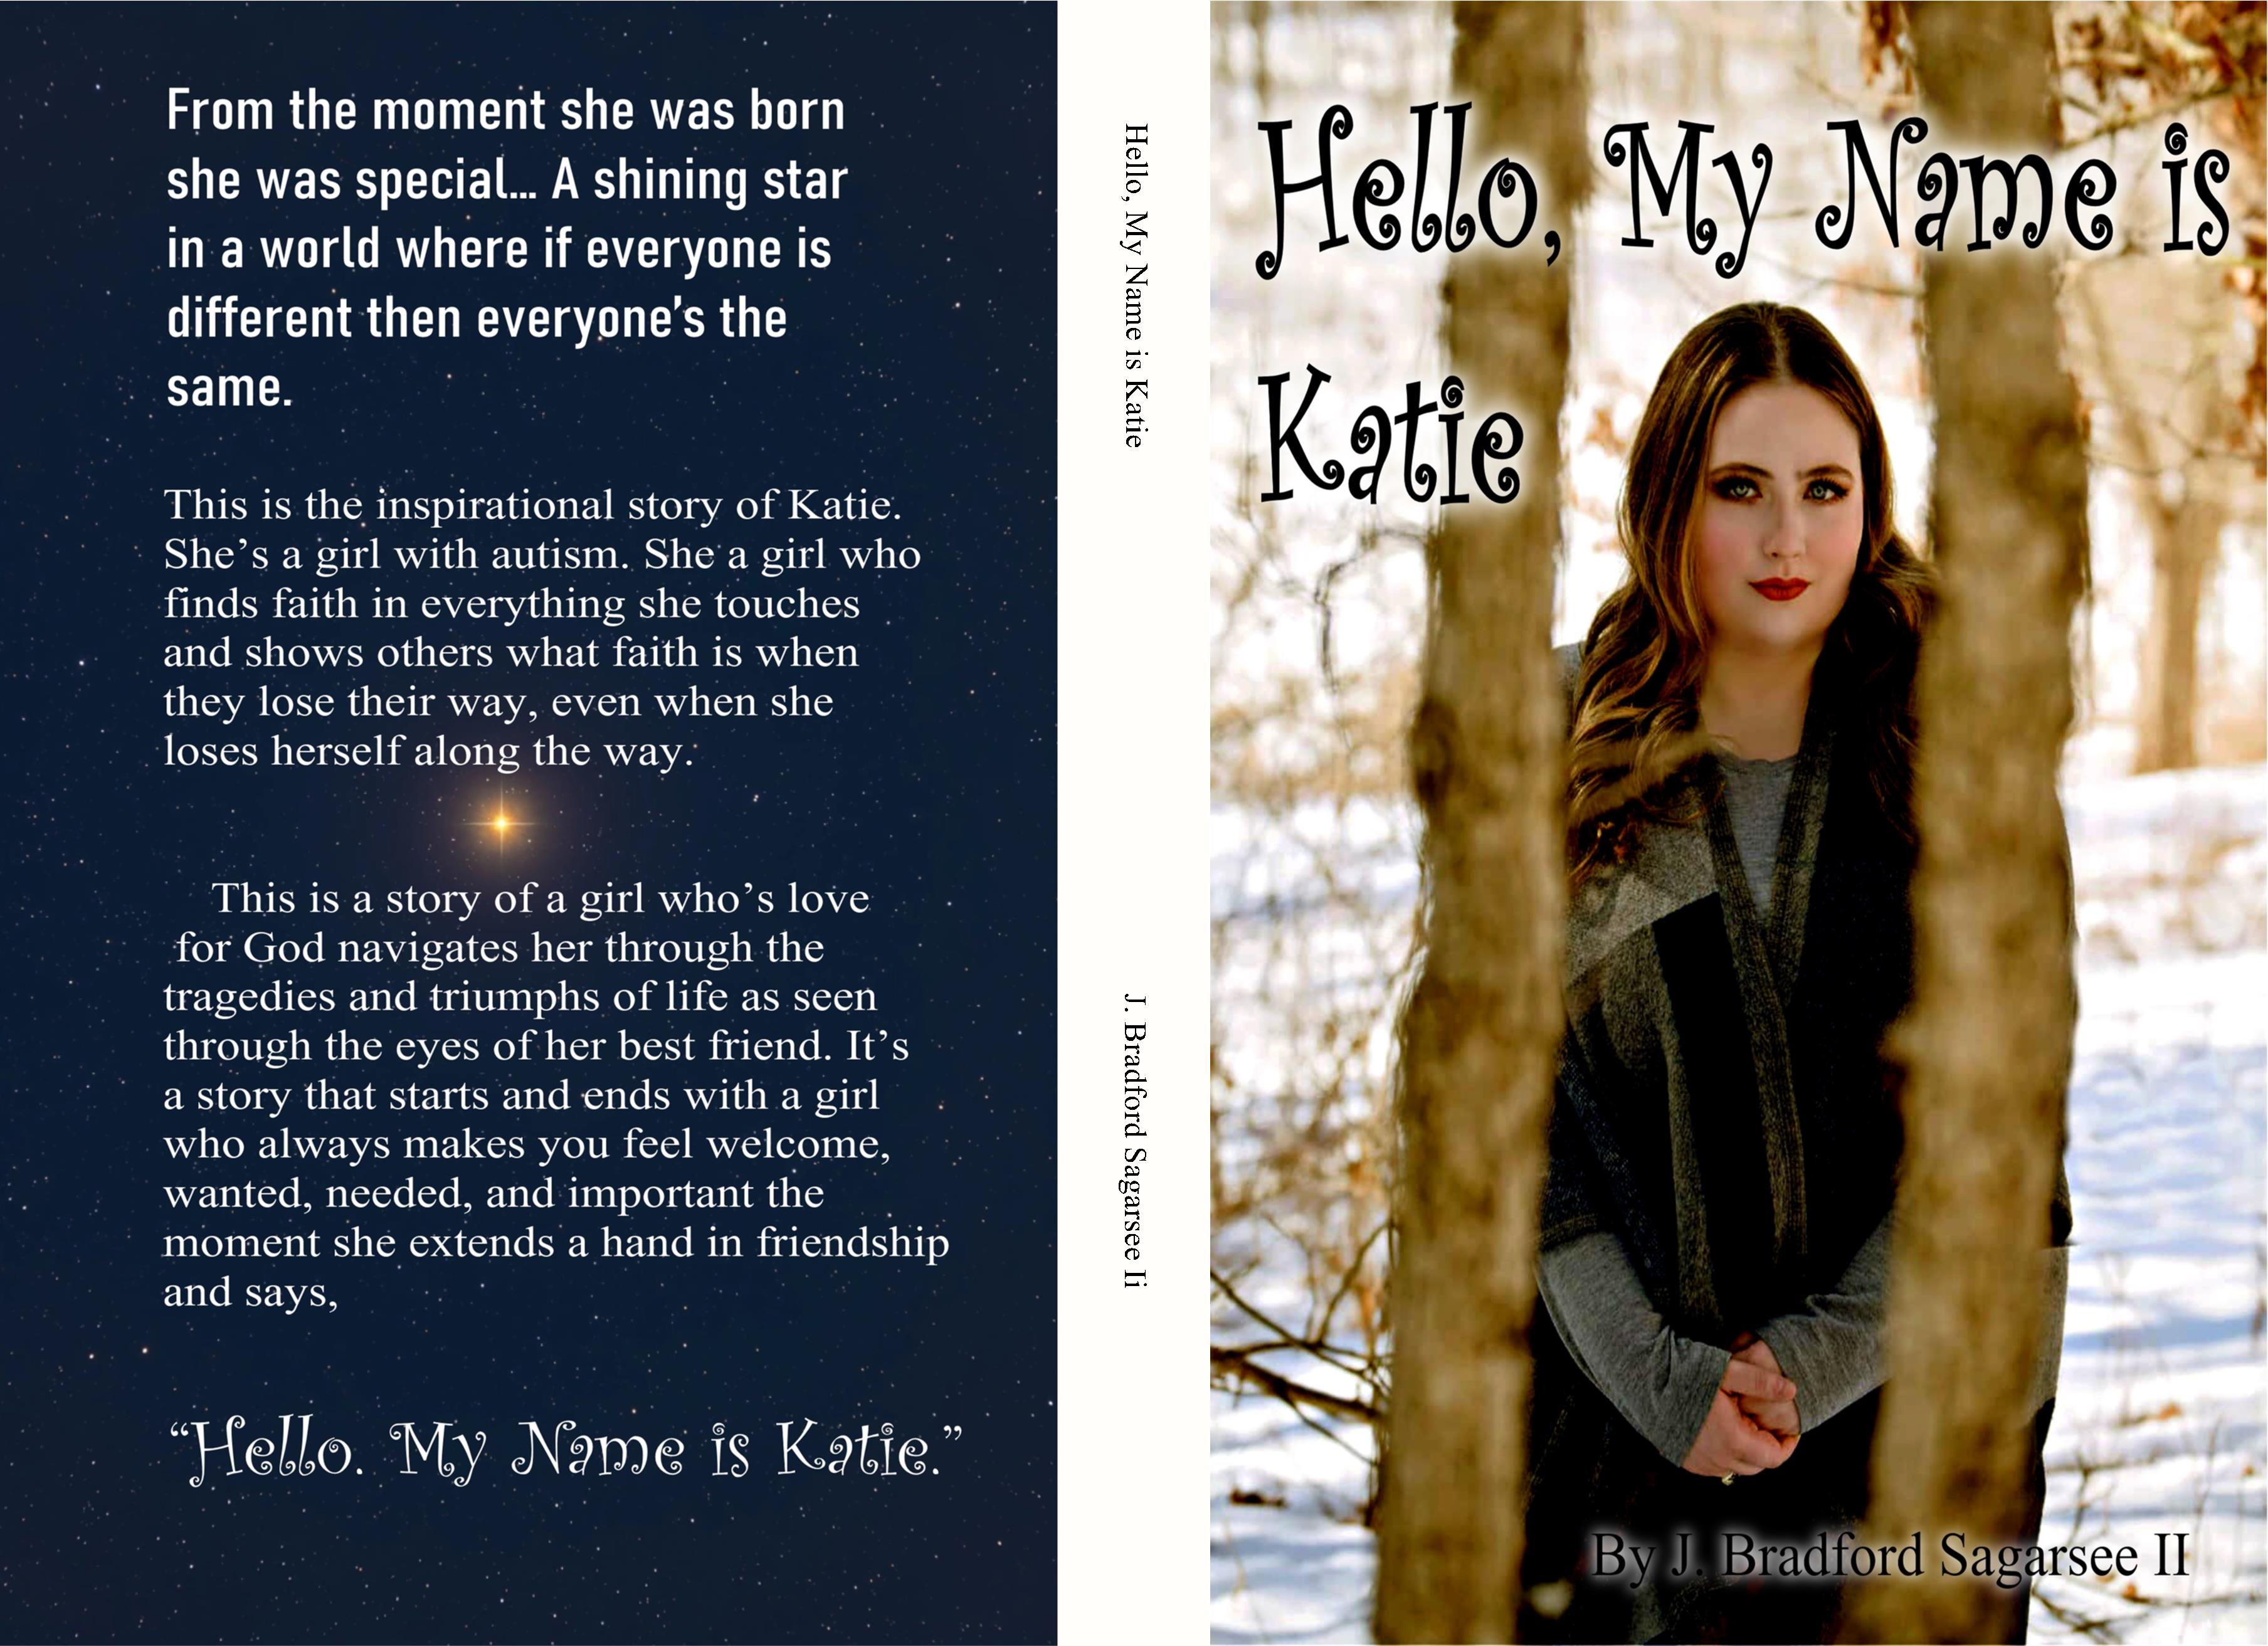 Hello, My Name is Katie cover image